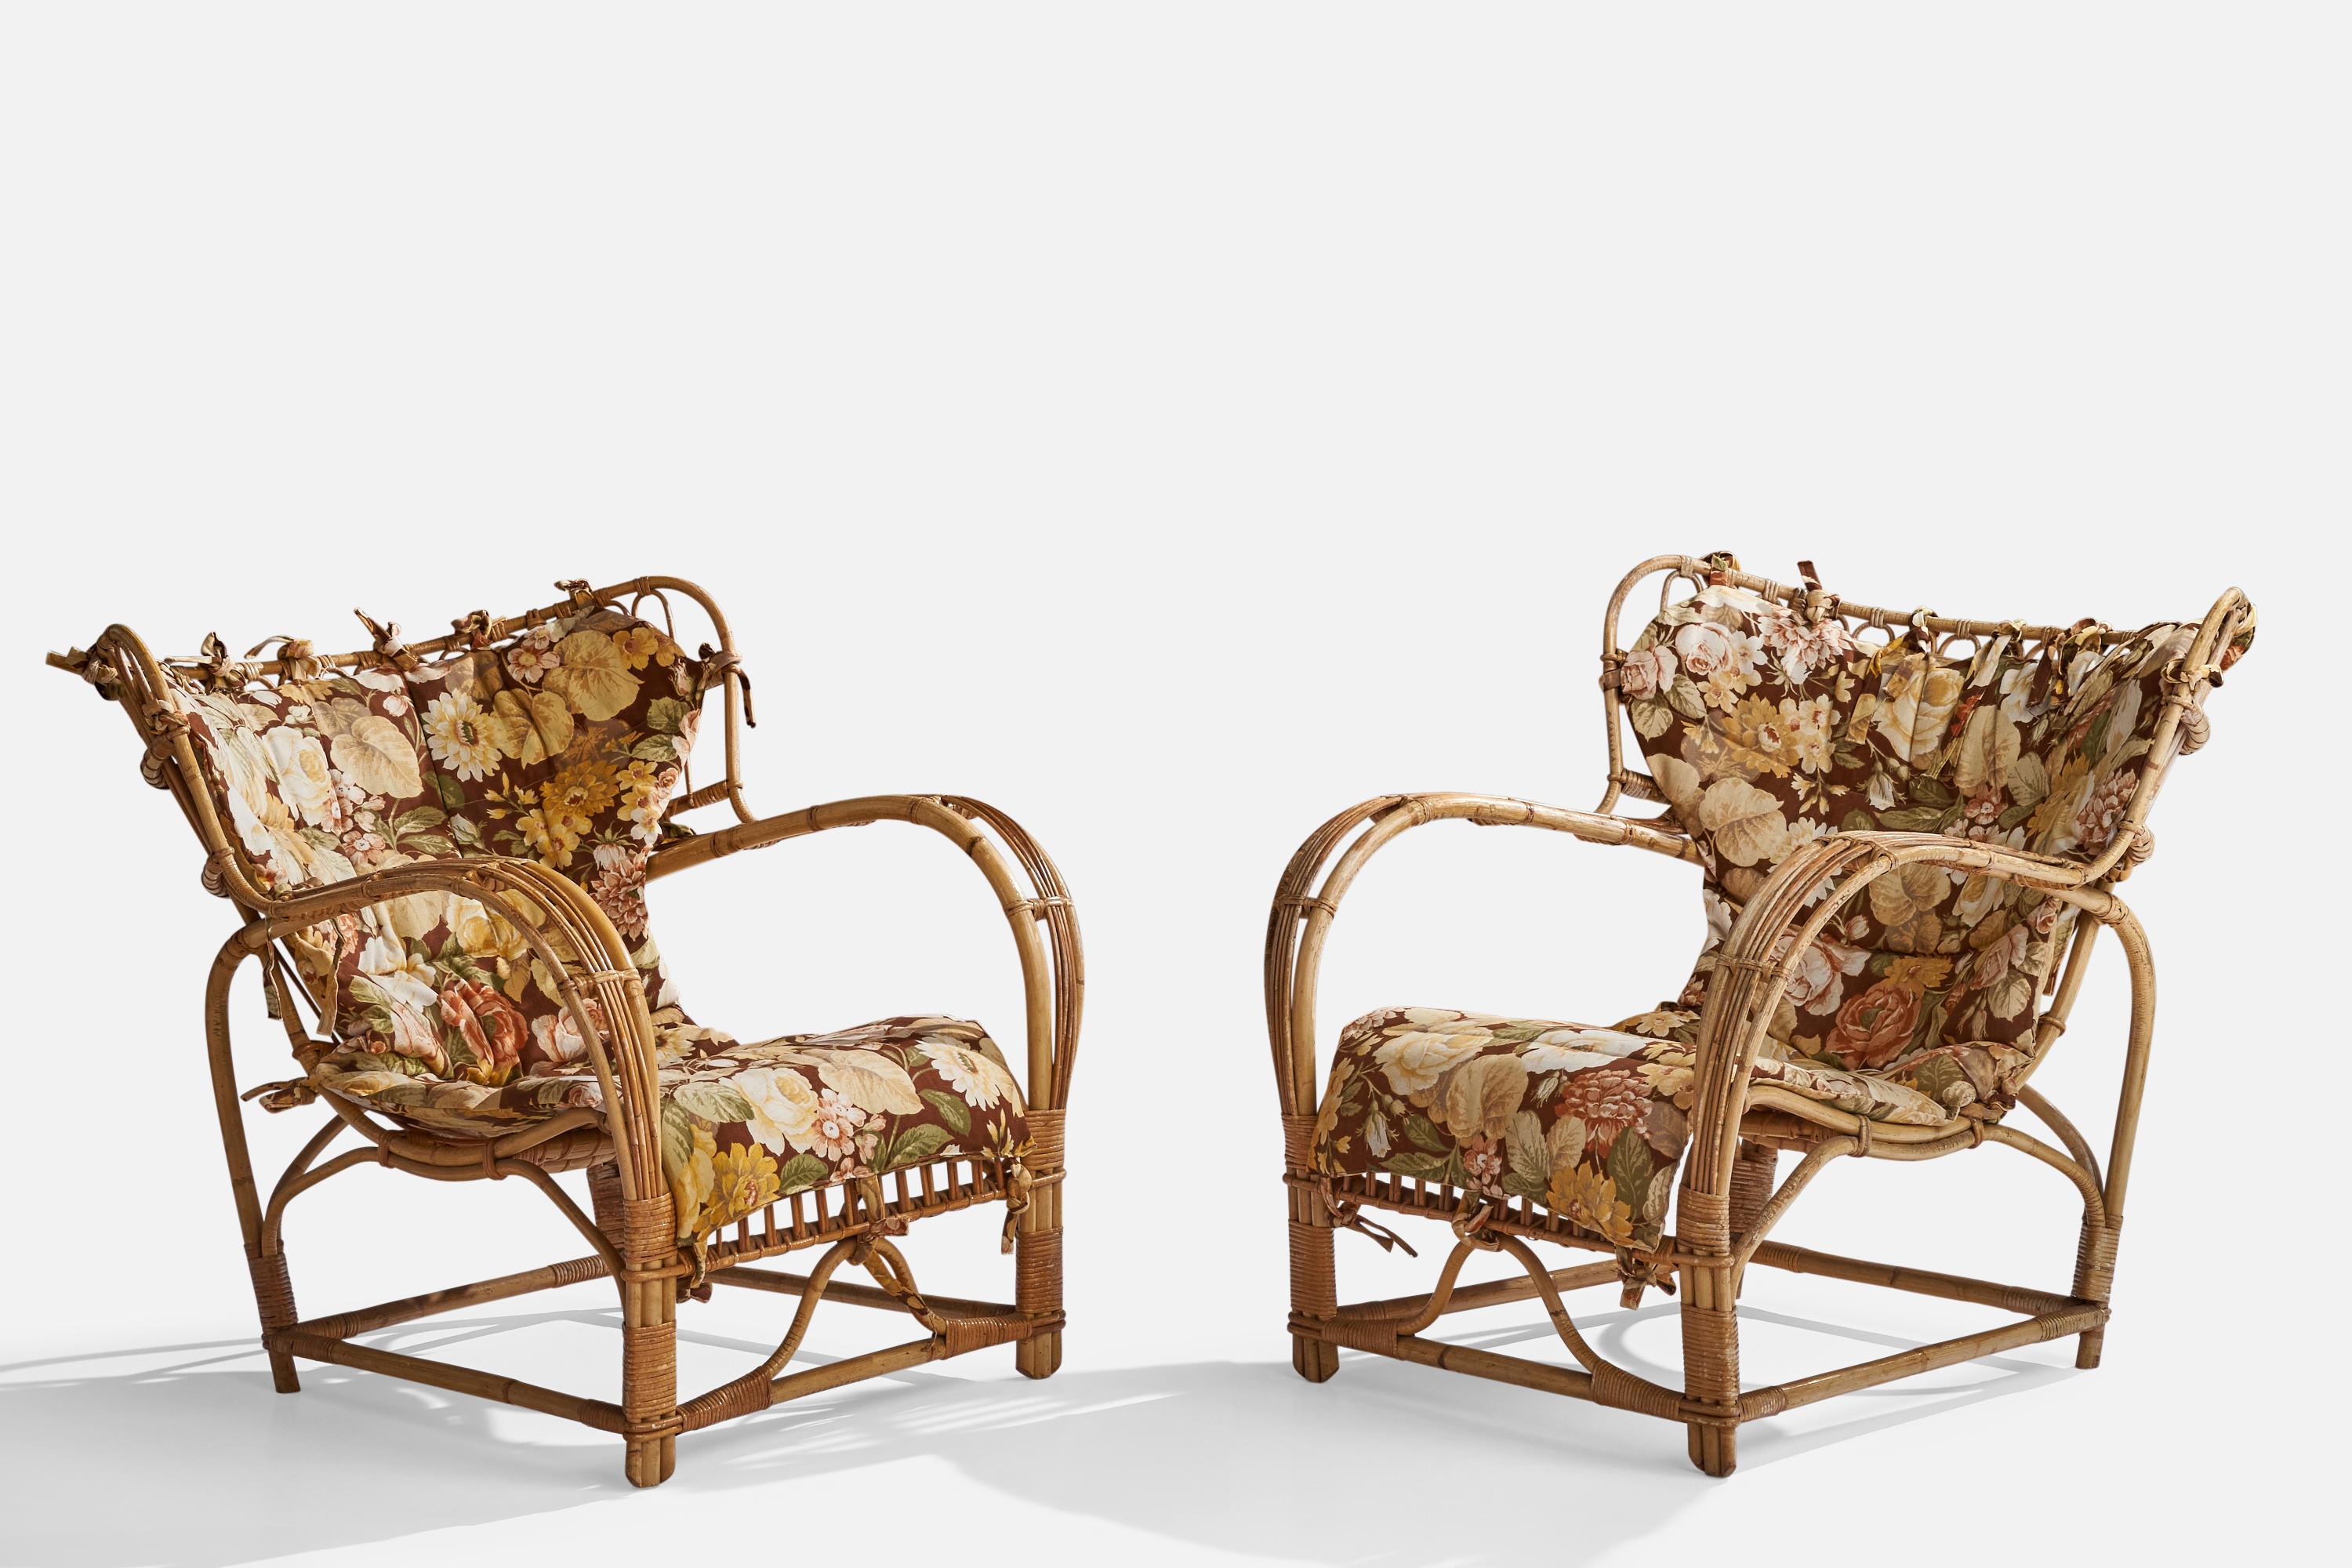 A pair of moulded bamboo, rattan and flower-printed fabric lounge chairs design attributed to Viggo Boesen, produced in Sweden, 1940s. 

Seat height 14.25”